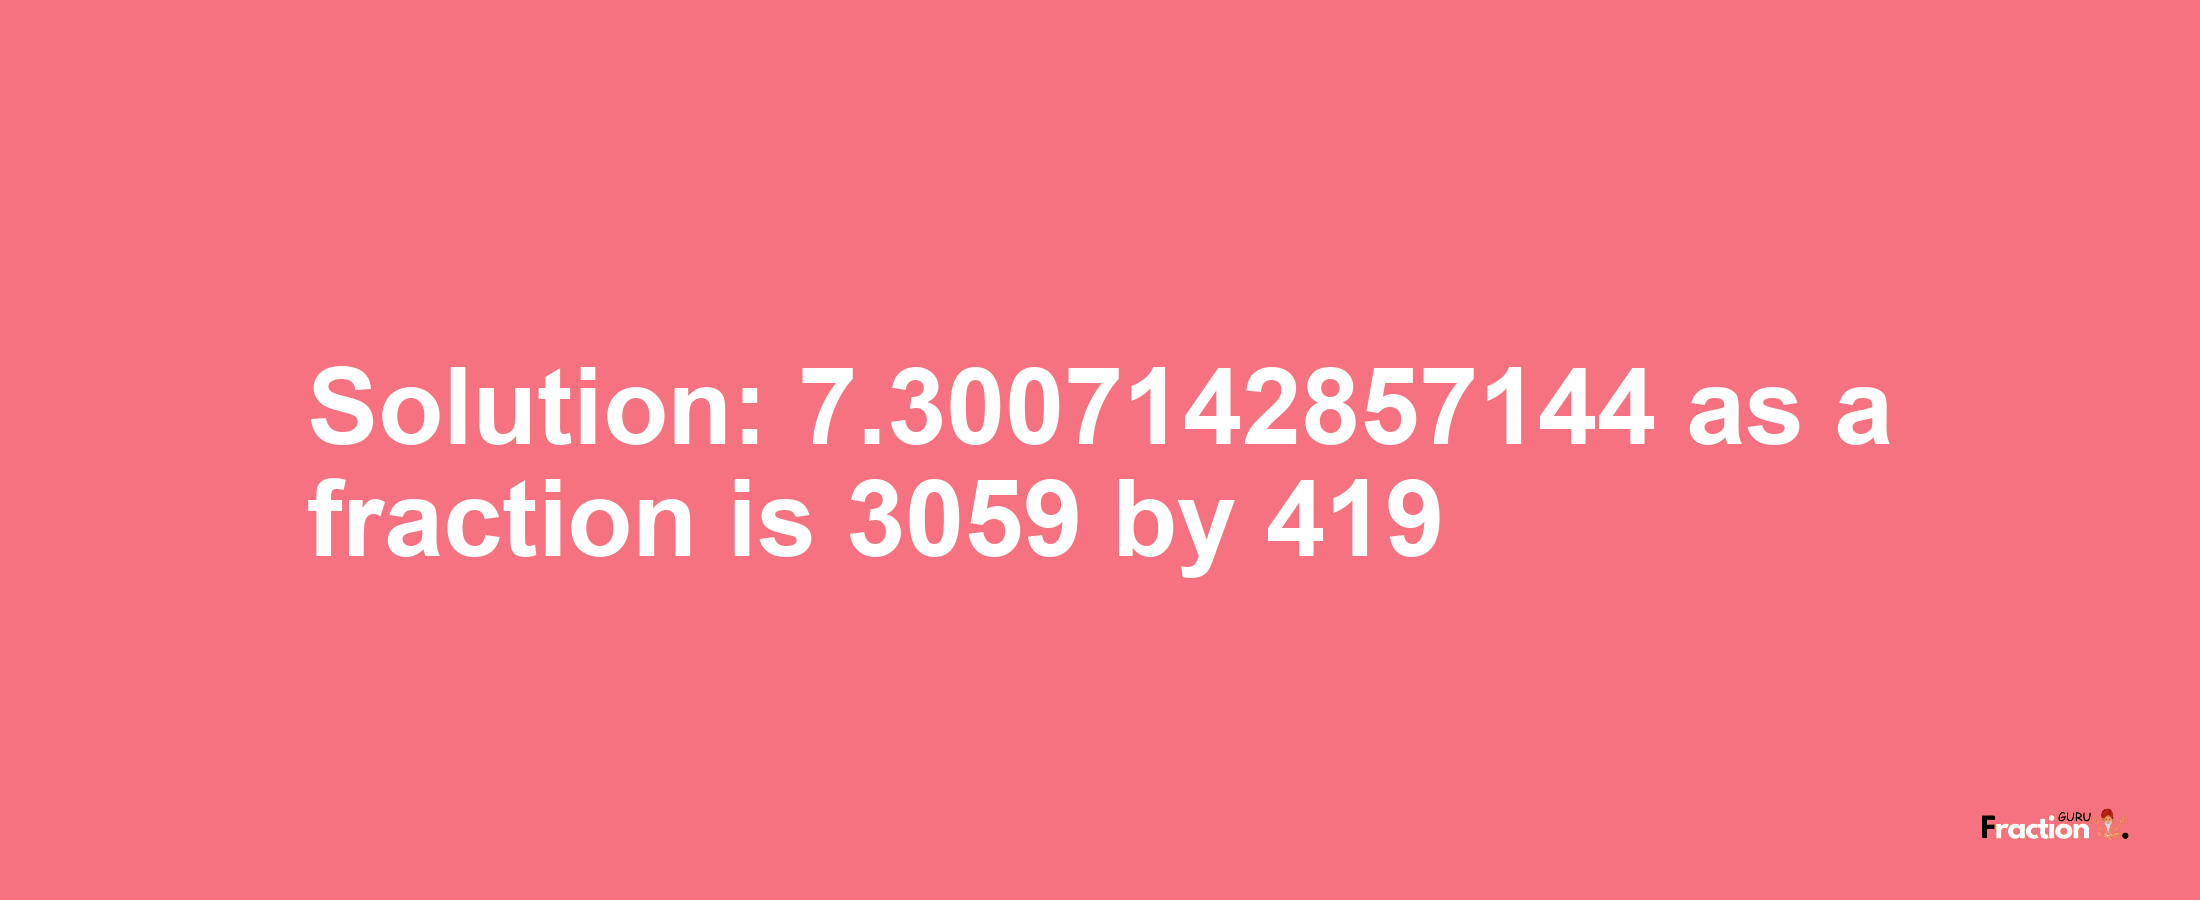 Solution:7.3007142857144 as a fraction is 3059/419